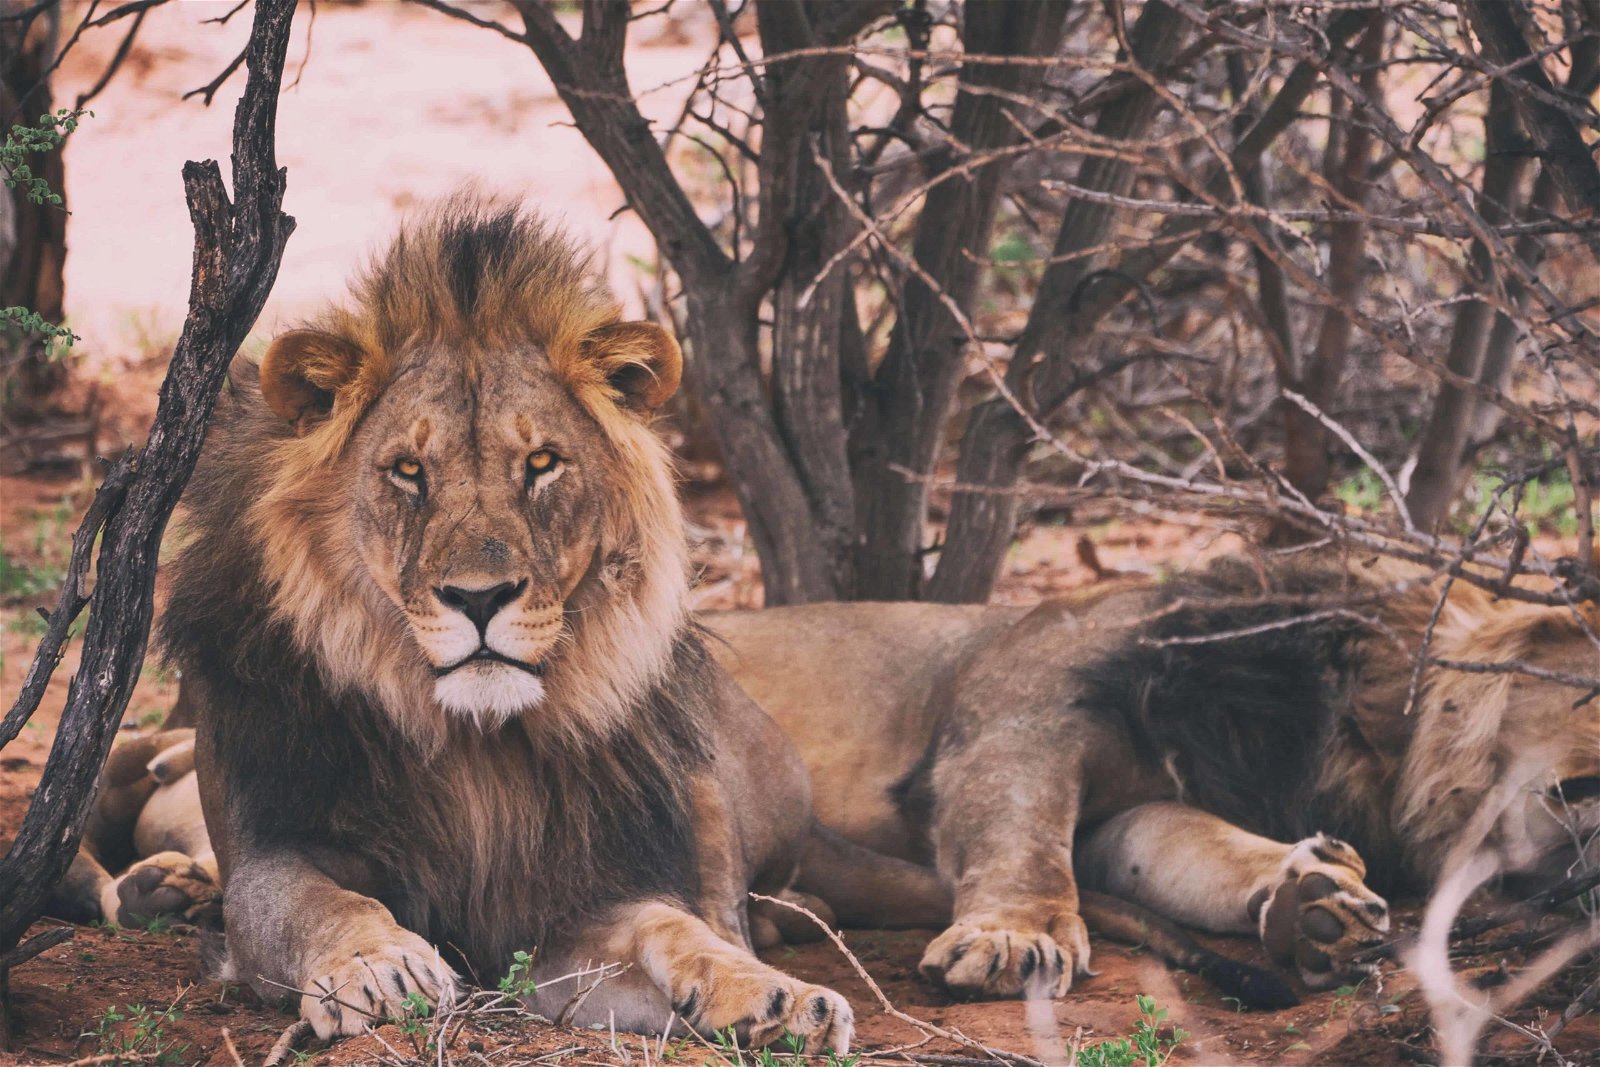 For animal lovers, the wildlife photography genre is for you, but you've got to find your subject such as this lion.